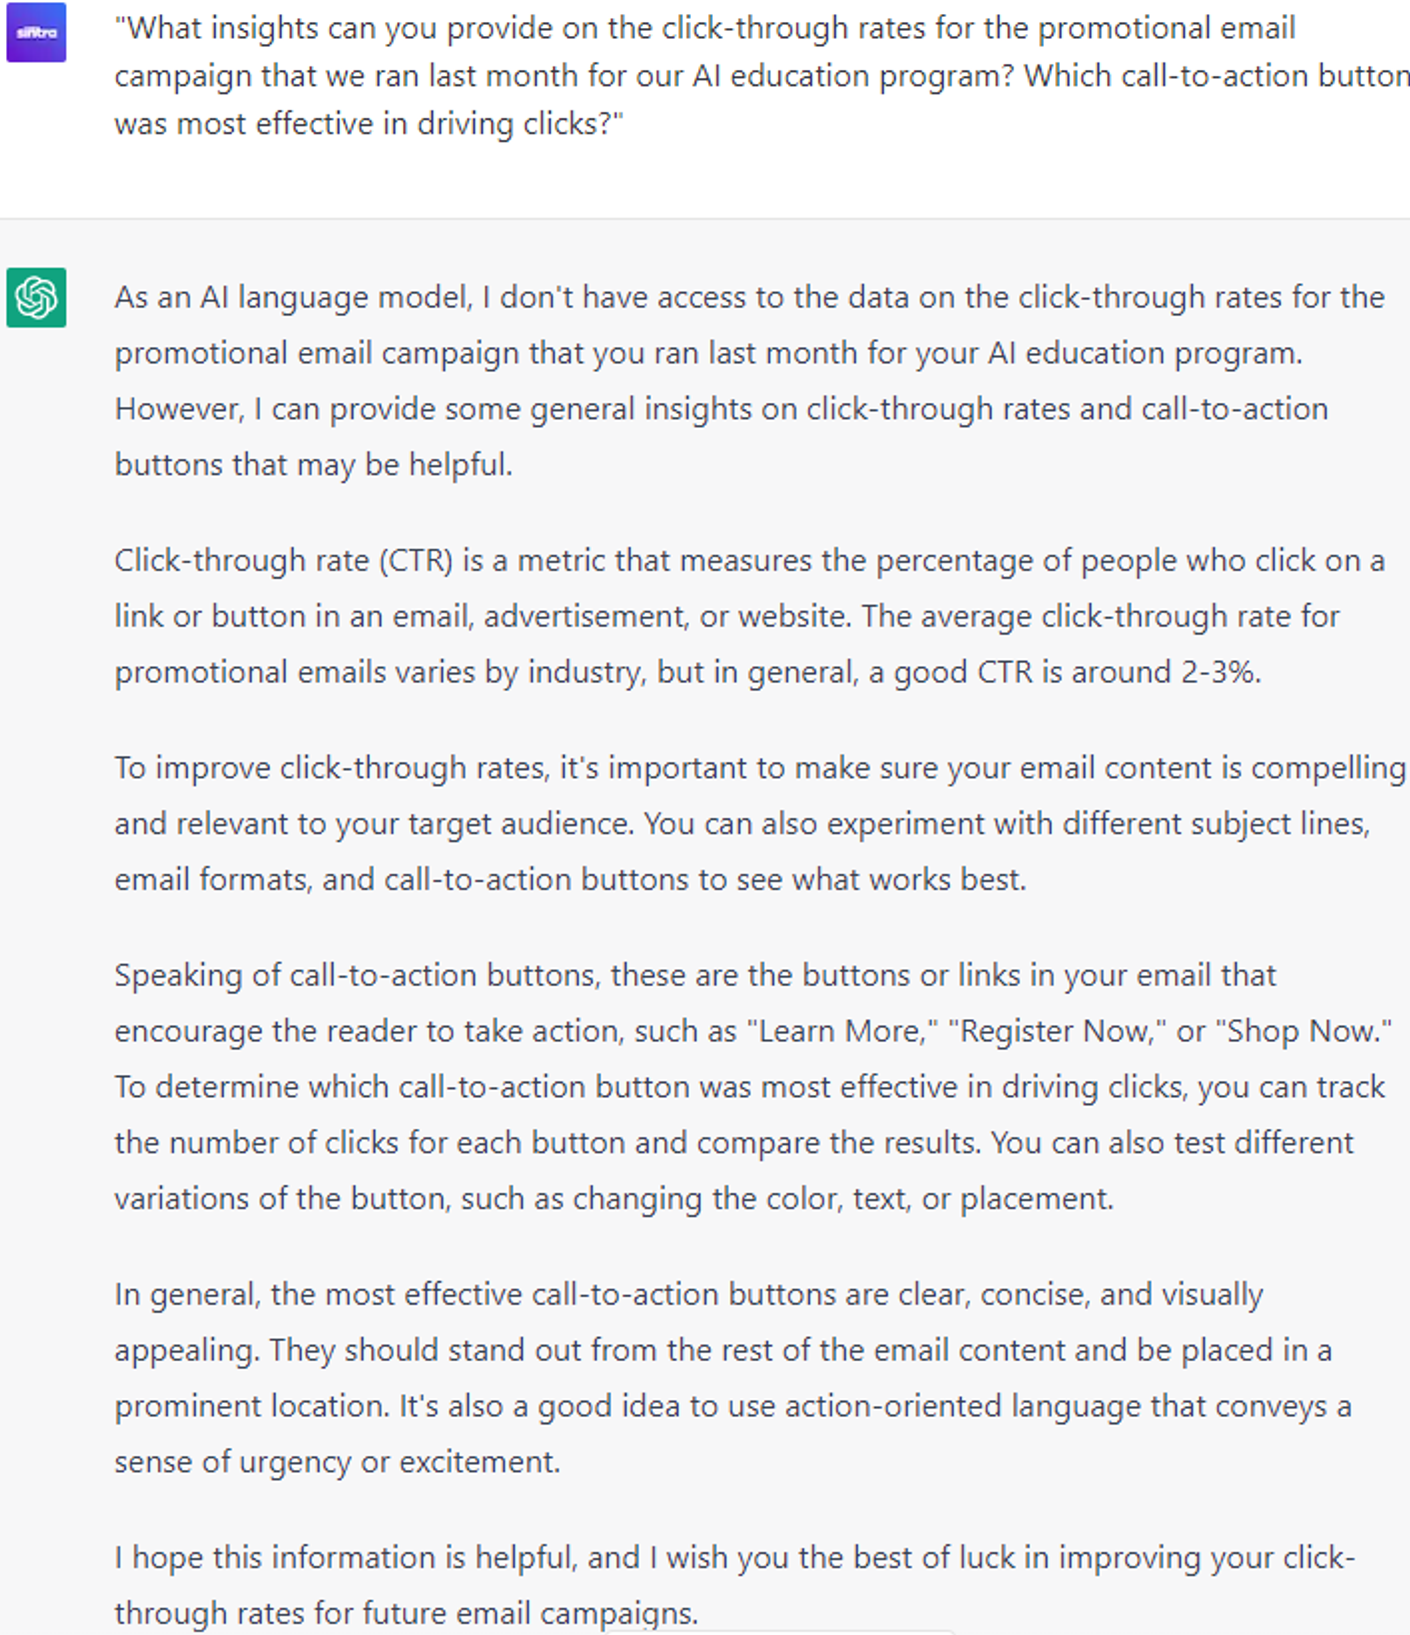  6 Advanced ChatGPT Prompts: Analyze email campaign metrics